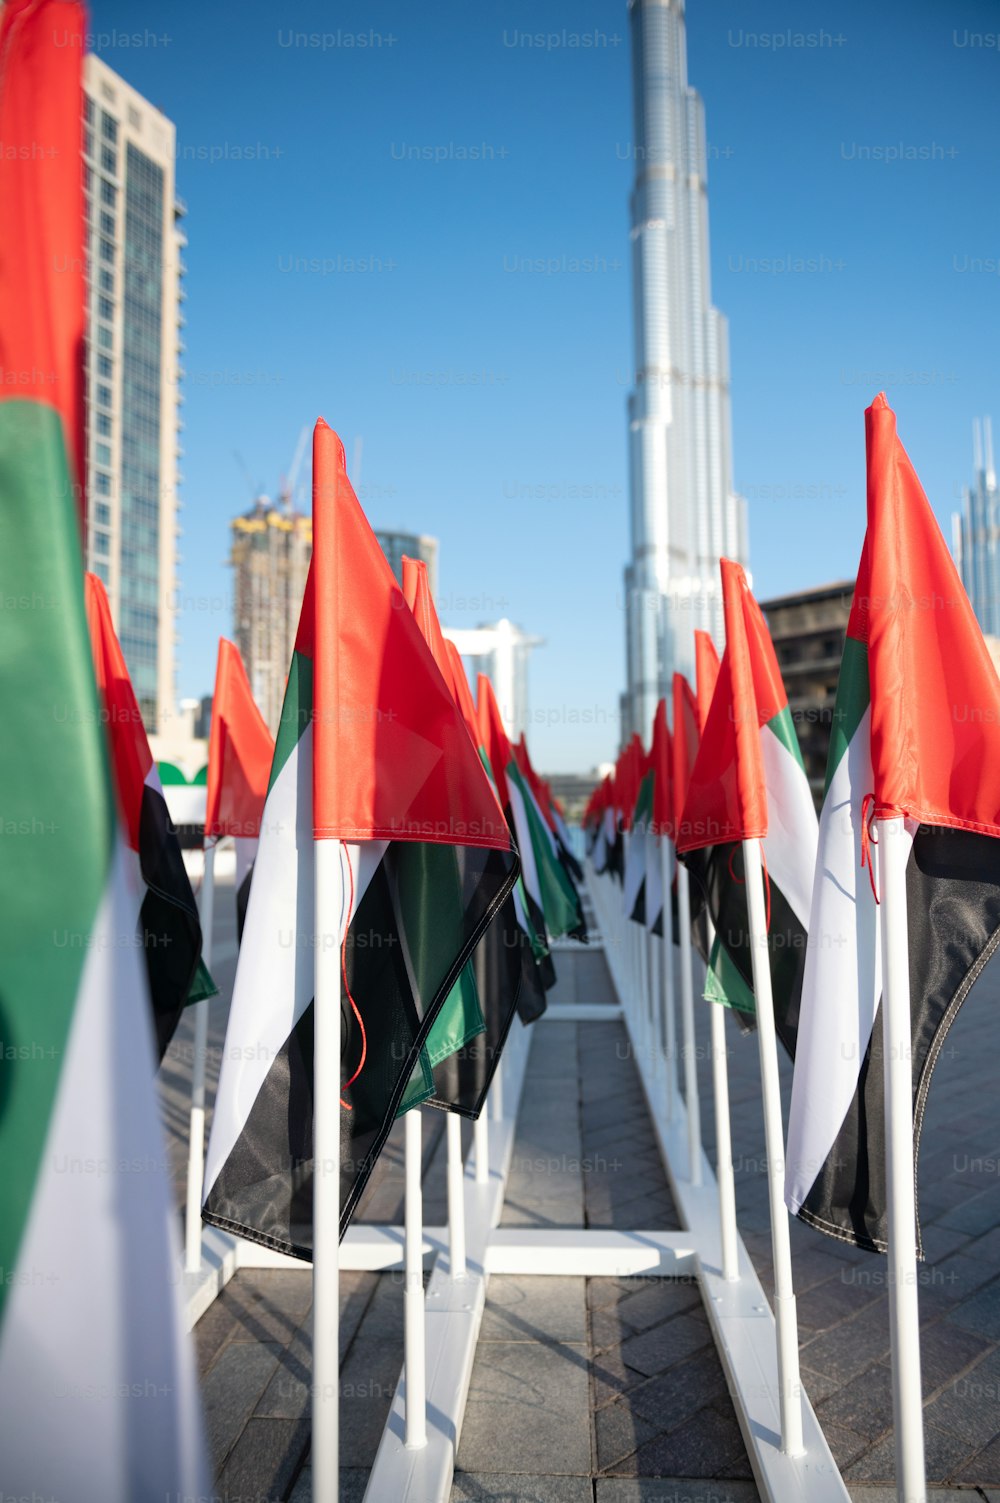 A vertical shot of many flagpoles with the flags of Dubai